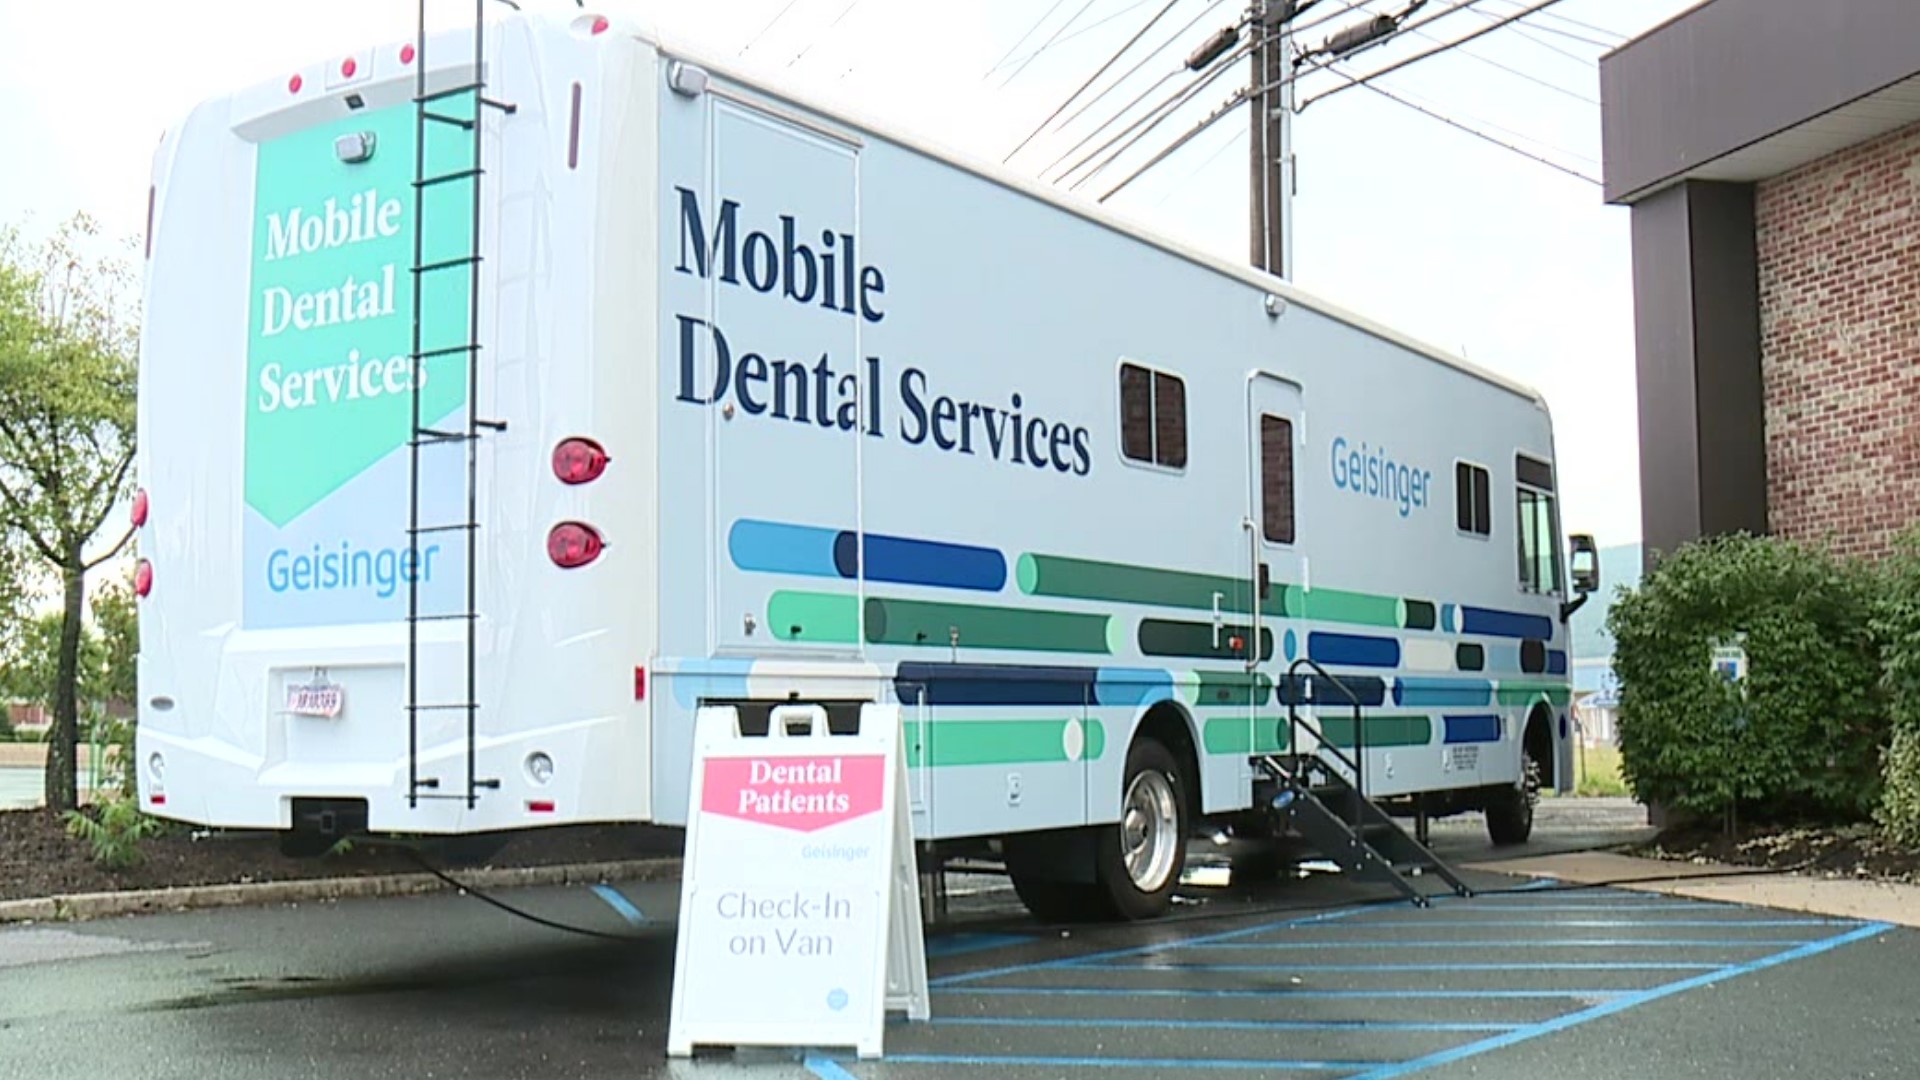 Geisinger dental care providers have hit the road to treat patients in our area.